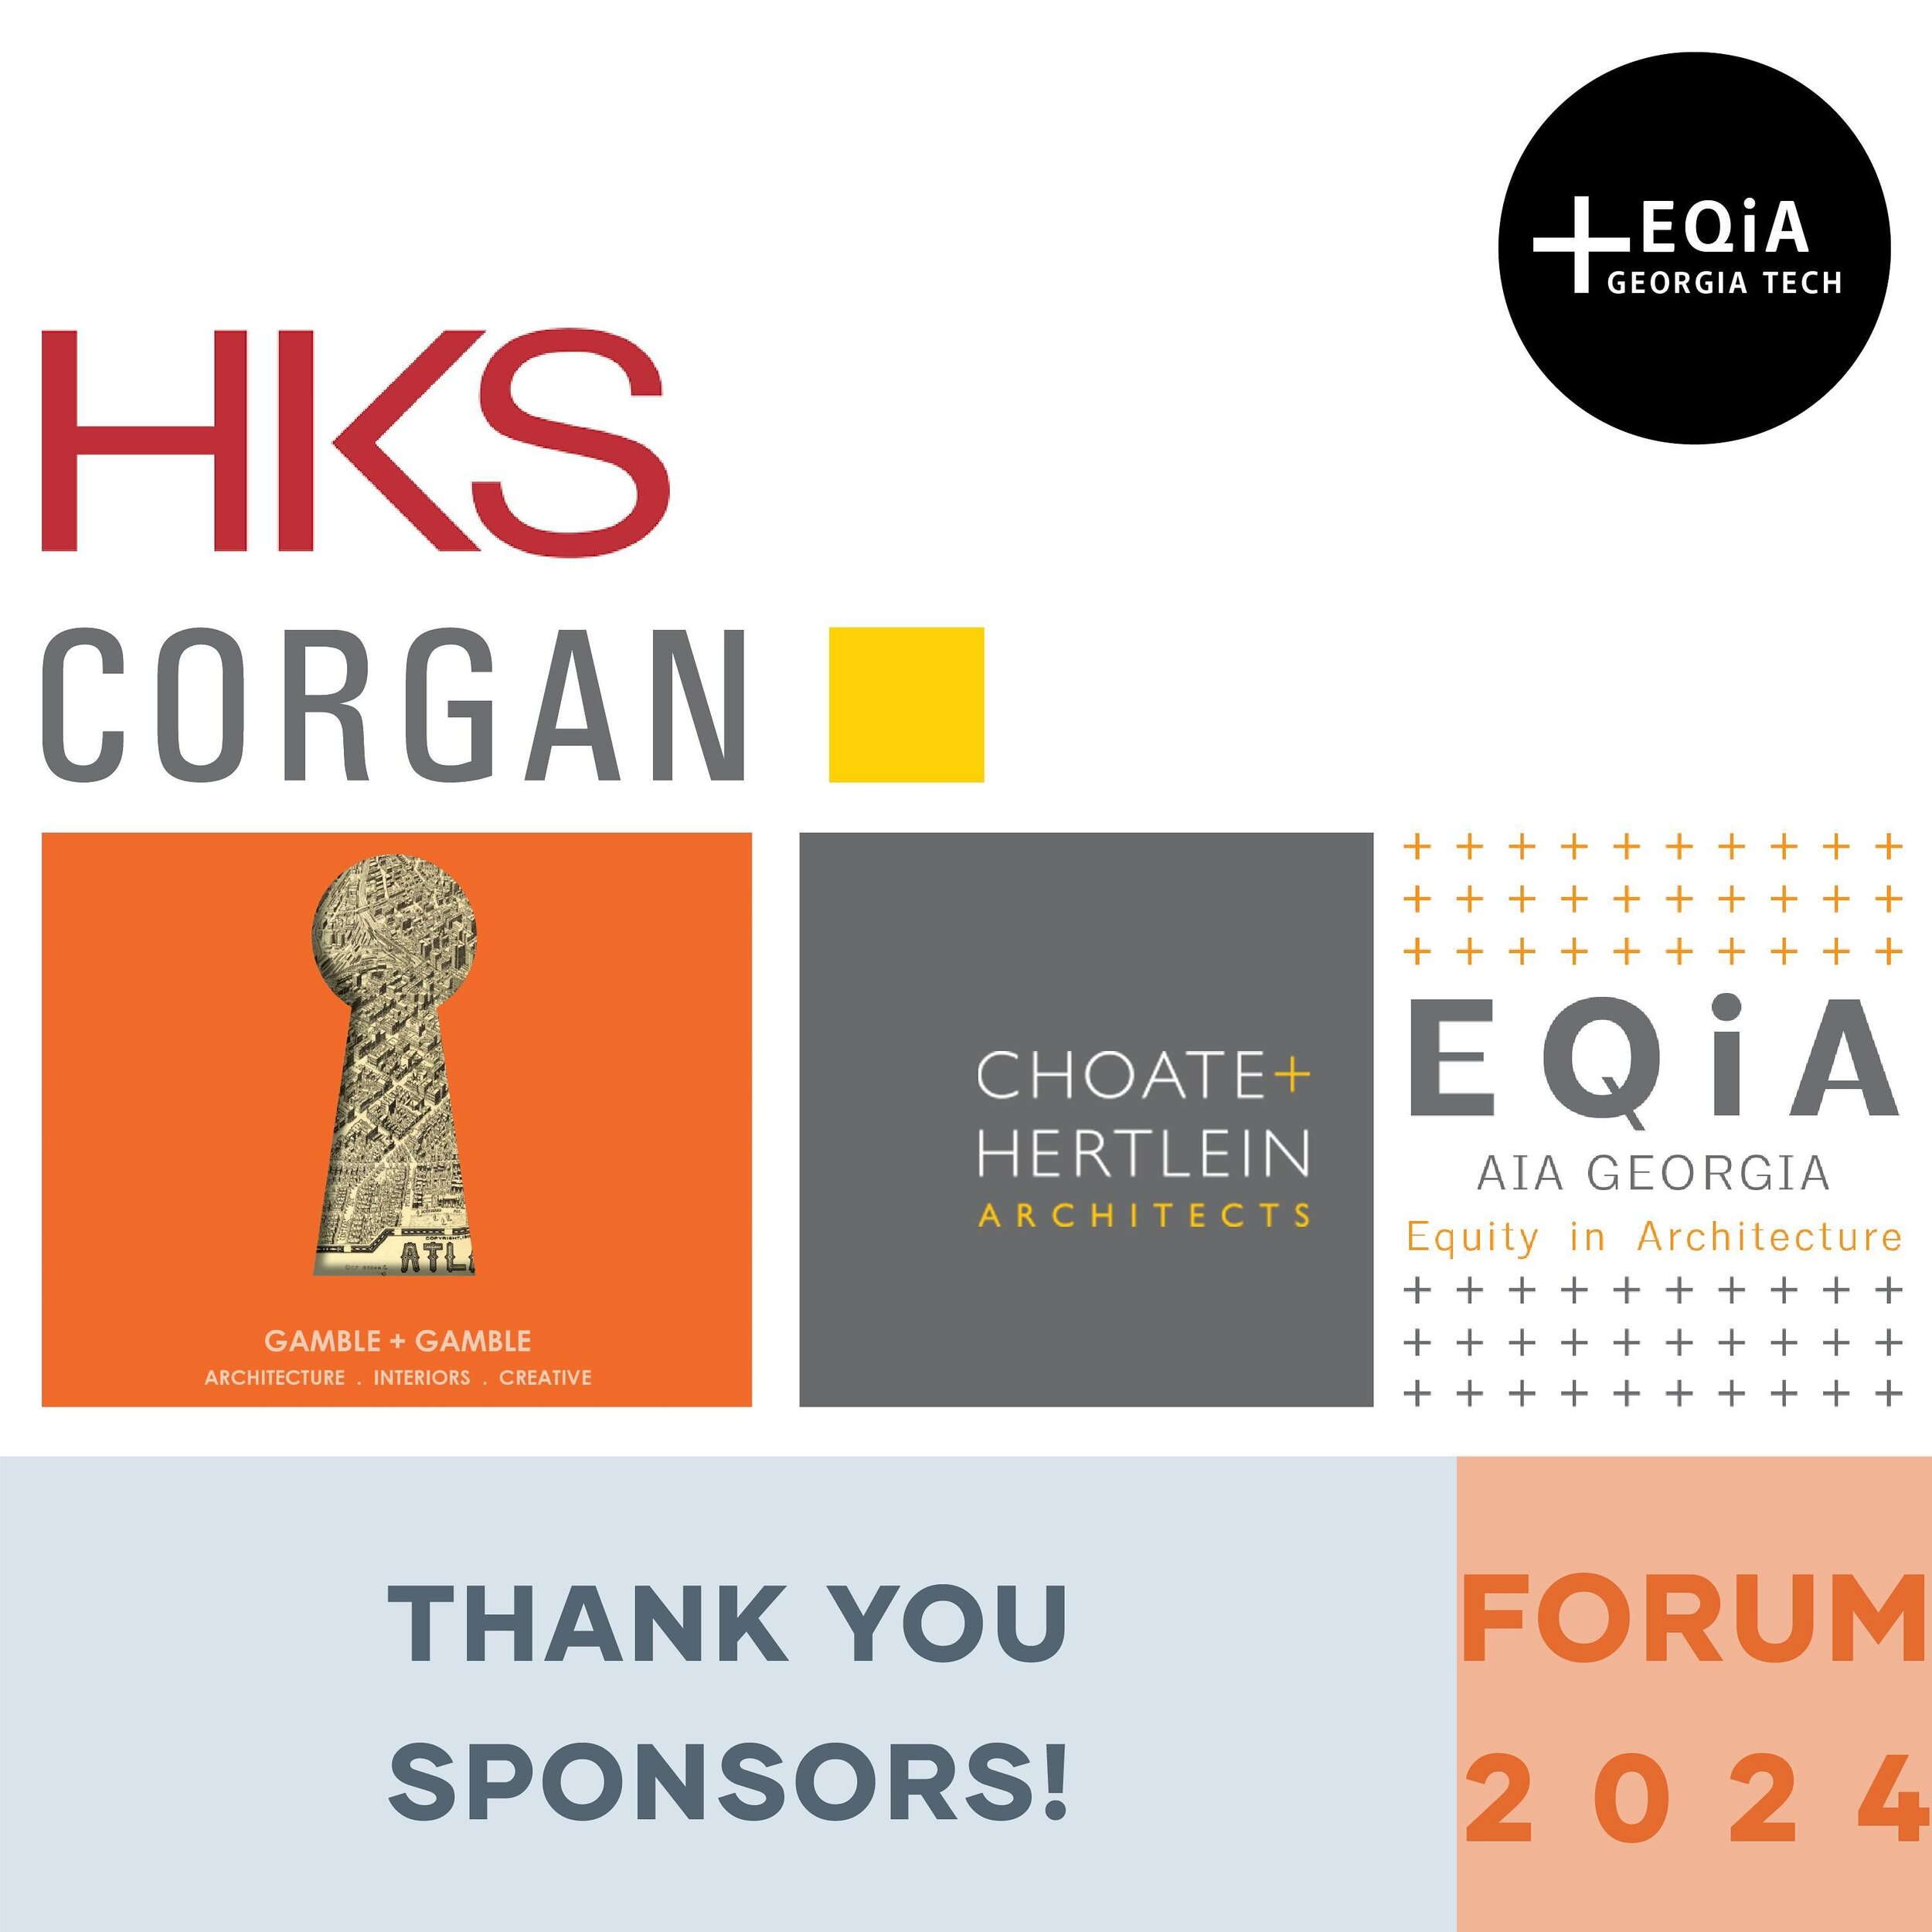 Thank you to our sponsors of this year&rsquo;s Forum! We appreciate and are thankful for your support as we try give space to discuss important topics in our field.